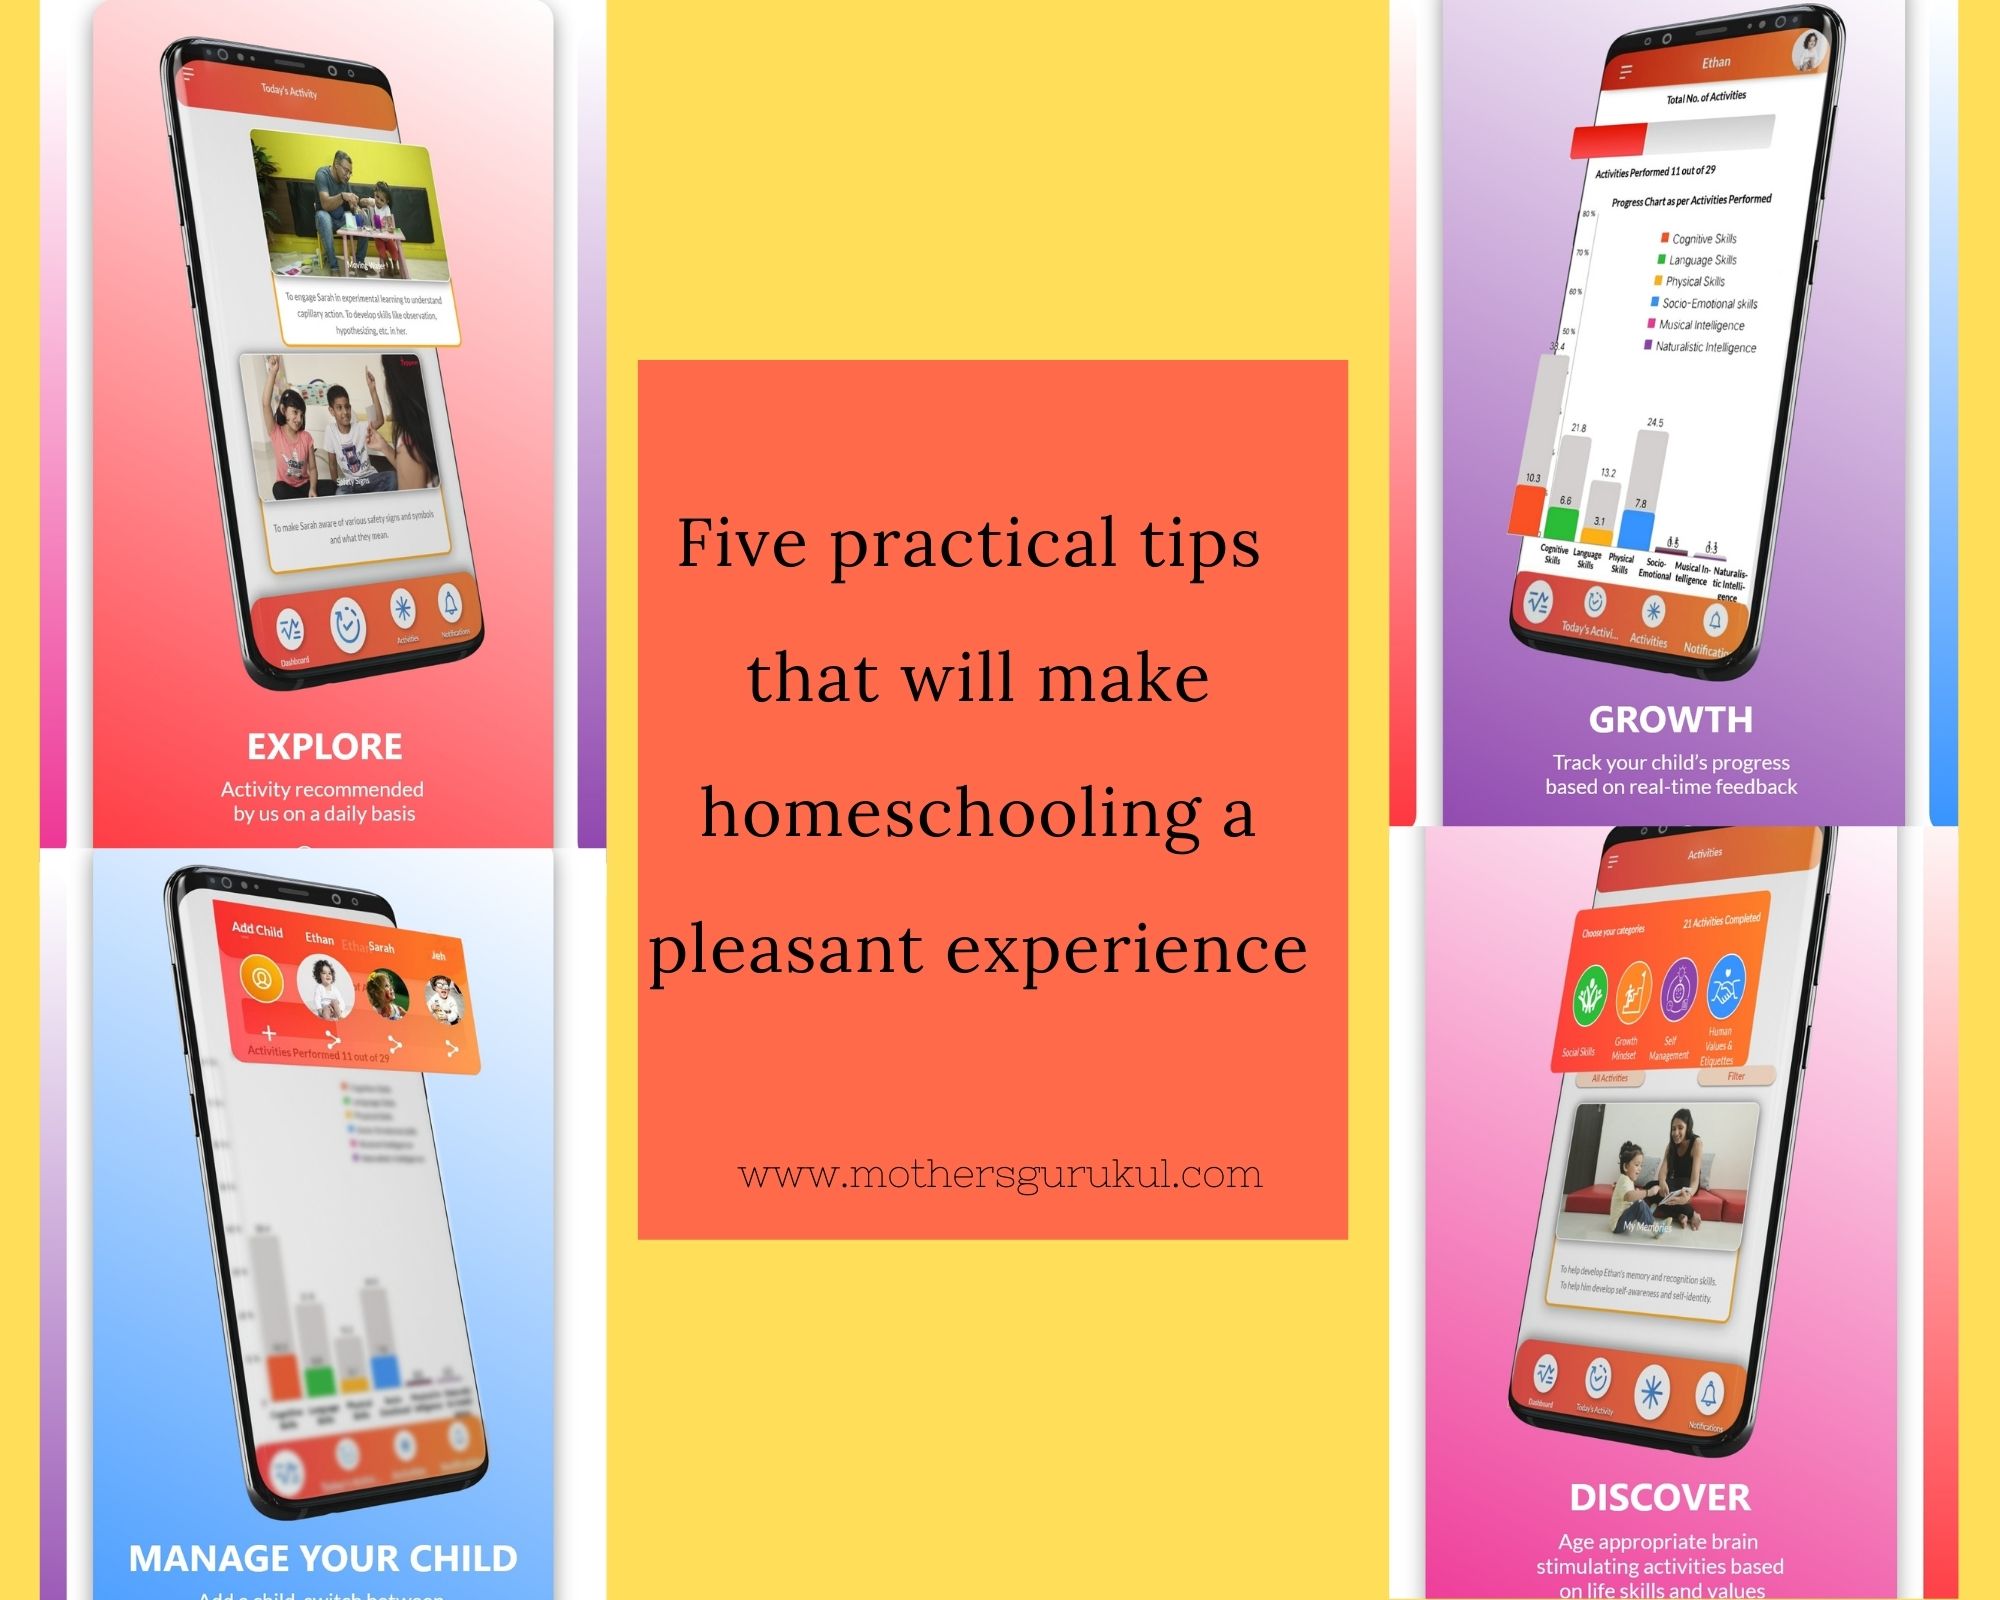 Five practical tips that will make homeschooling a pleasant experience